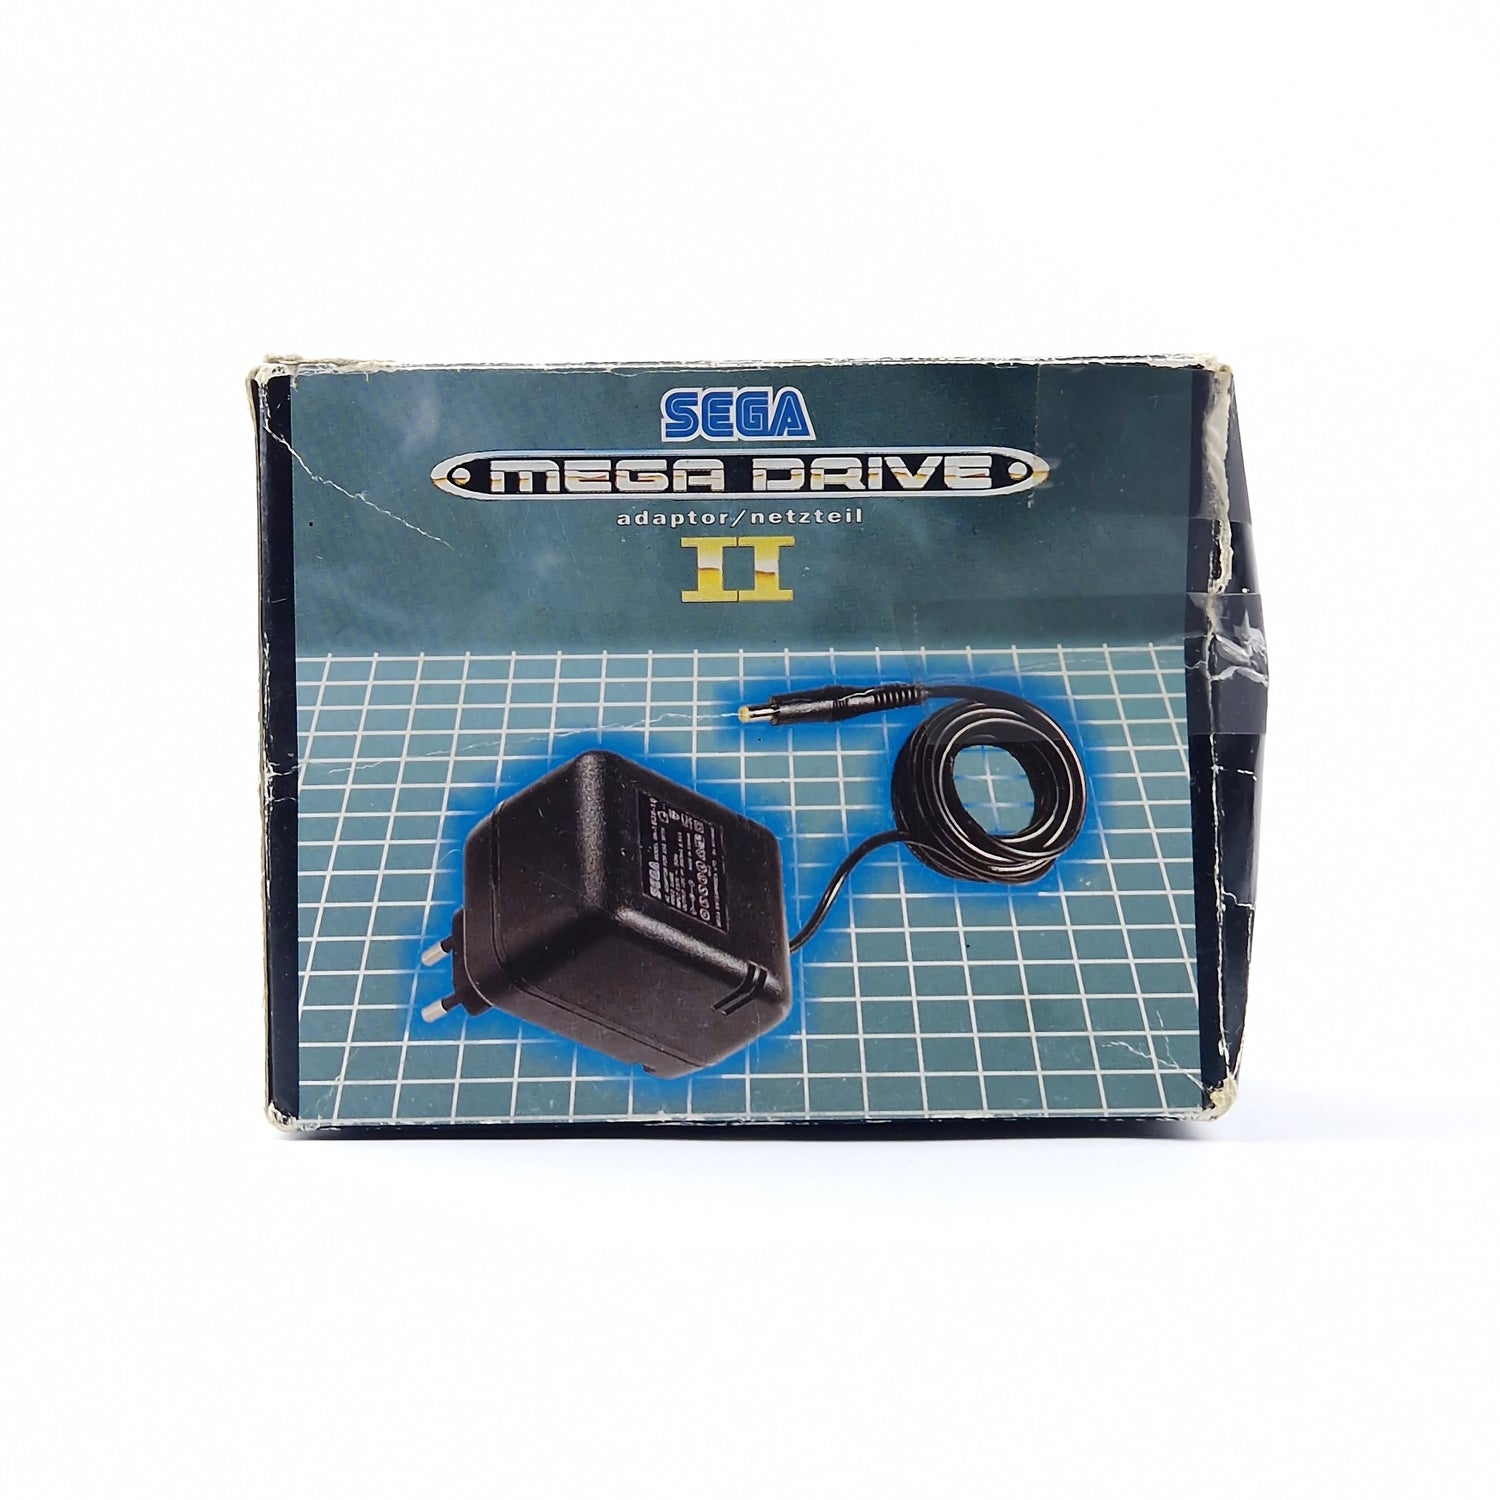 Sega Mega Drive II 2 Accessories Item: Adapter / Power Supply - Cable Cable OVP PAL